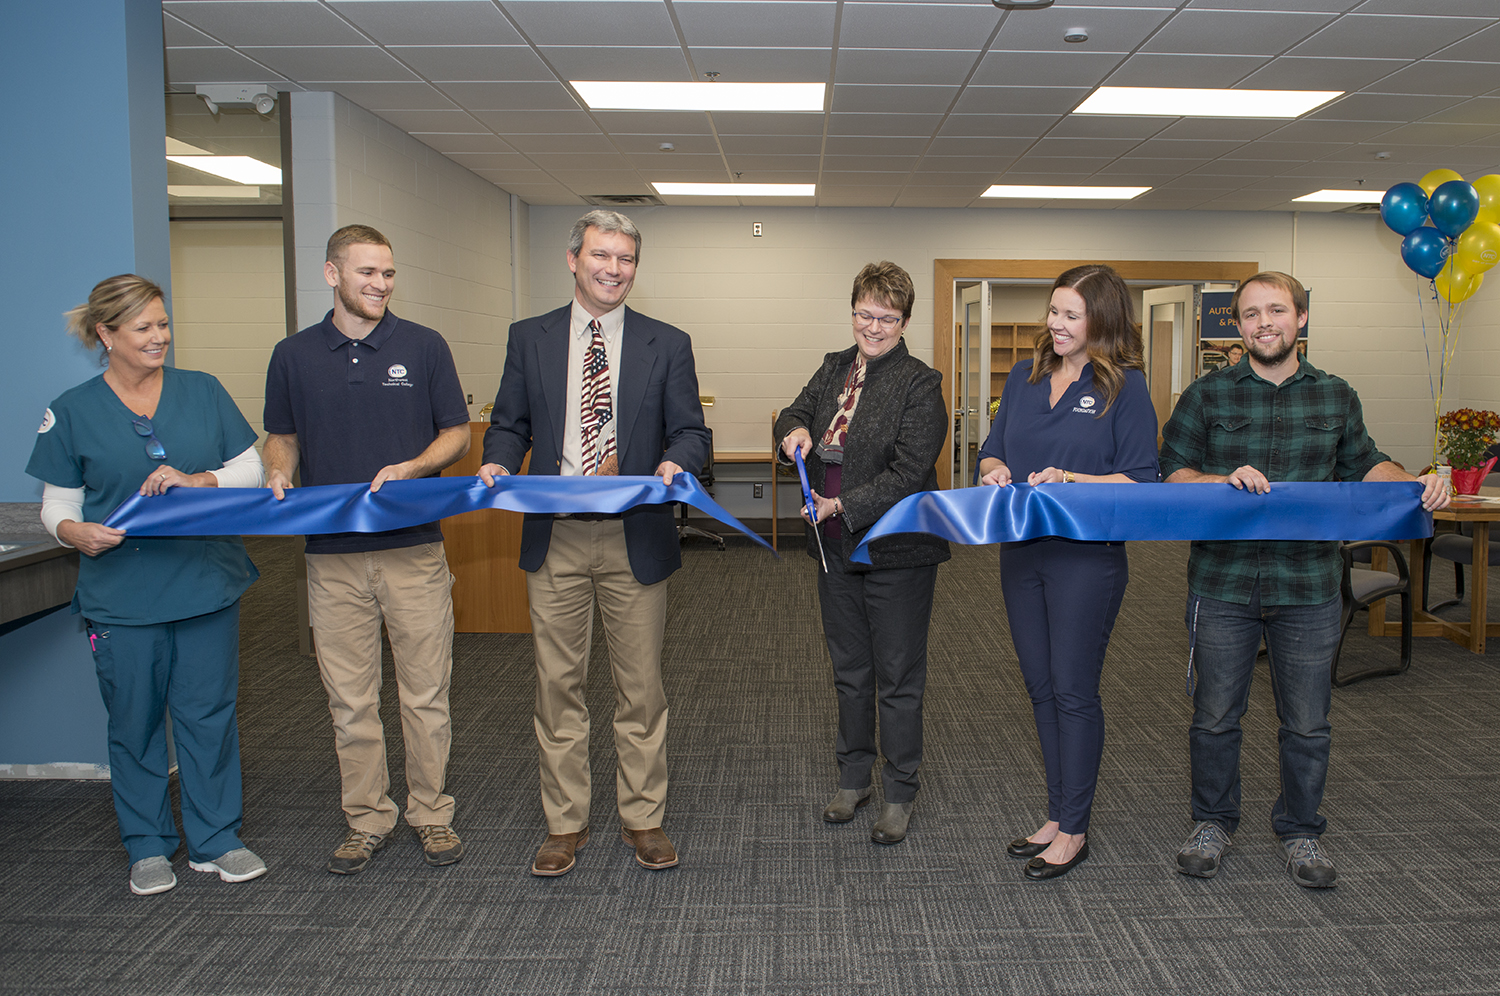 President Hensrud officially opens the Student Success Center with a ribbon cutting.